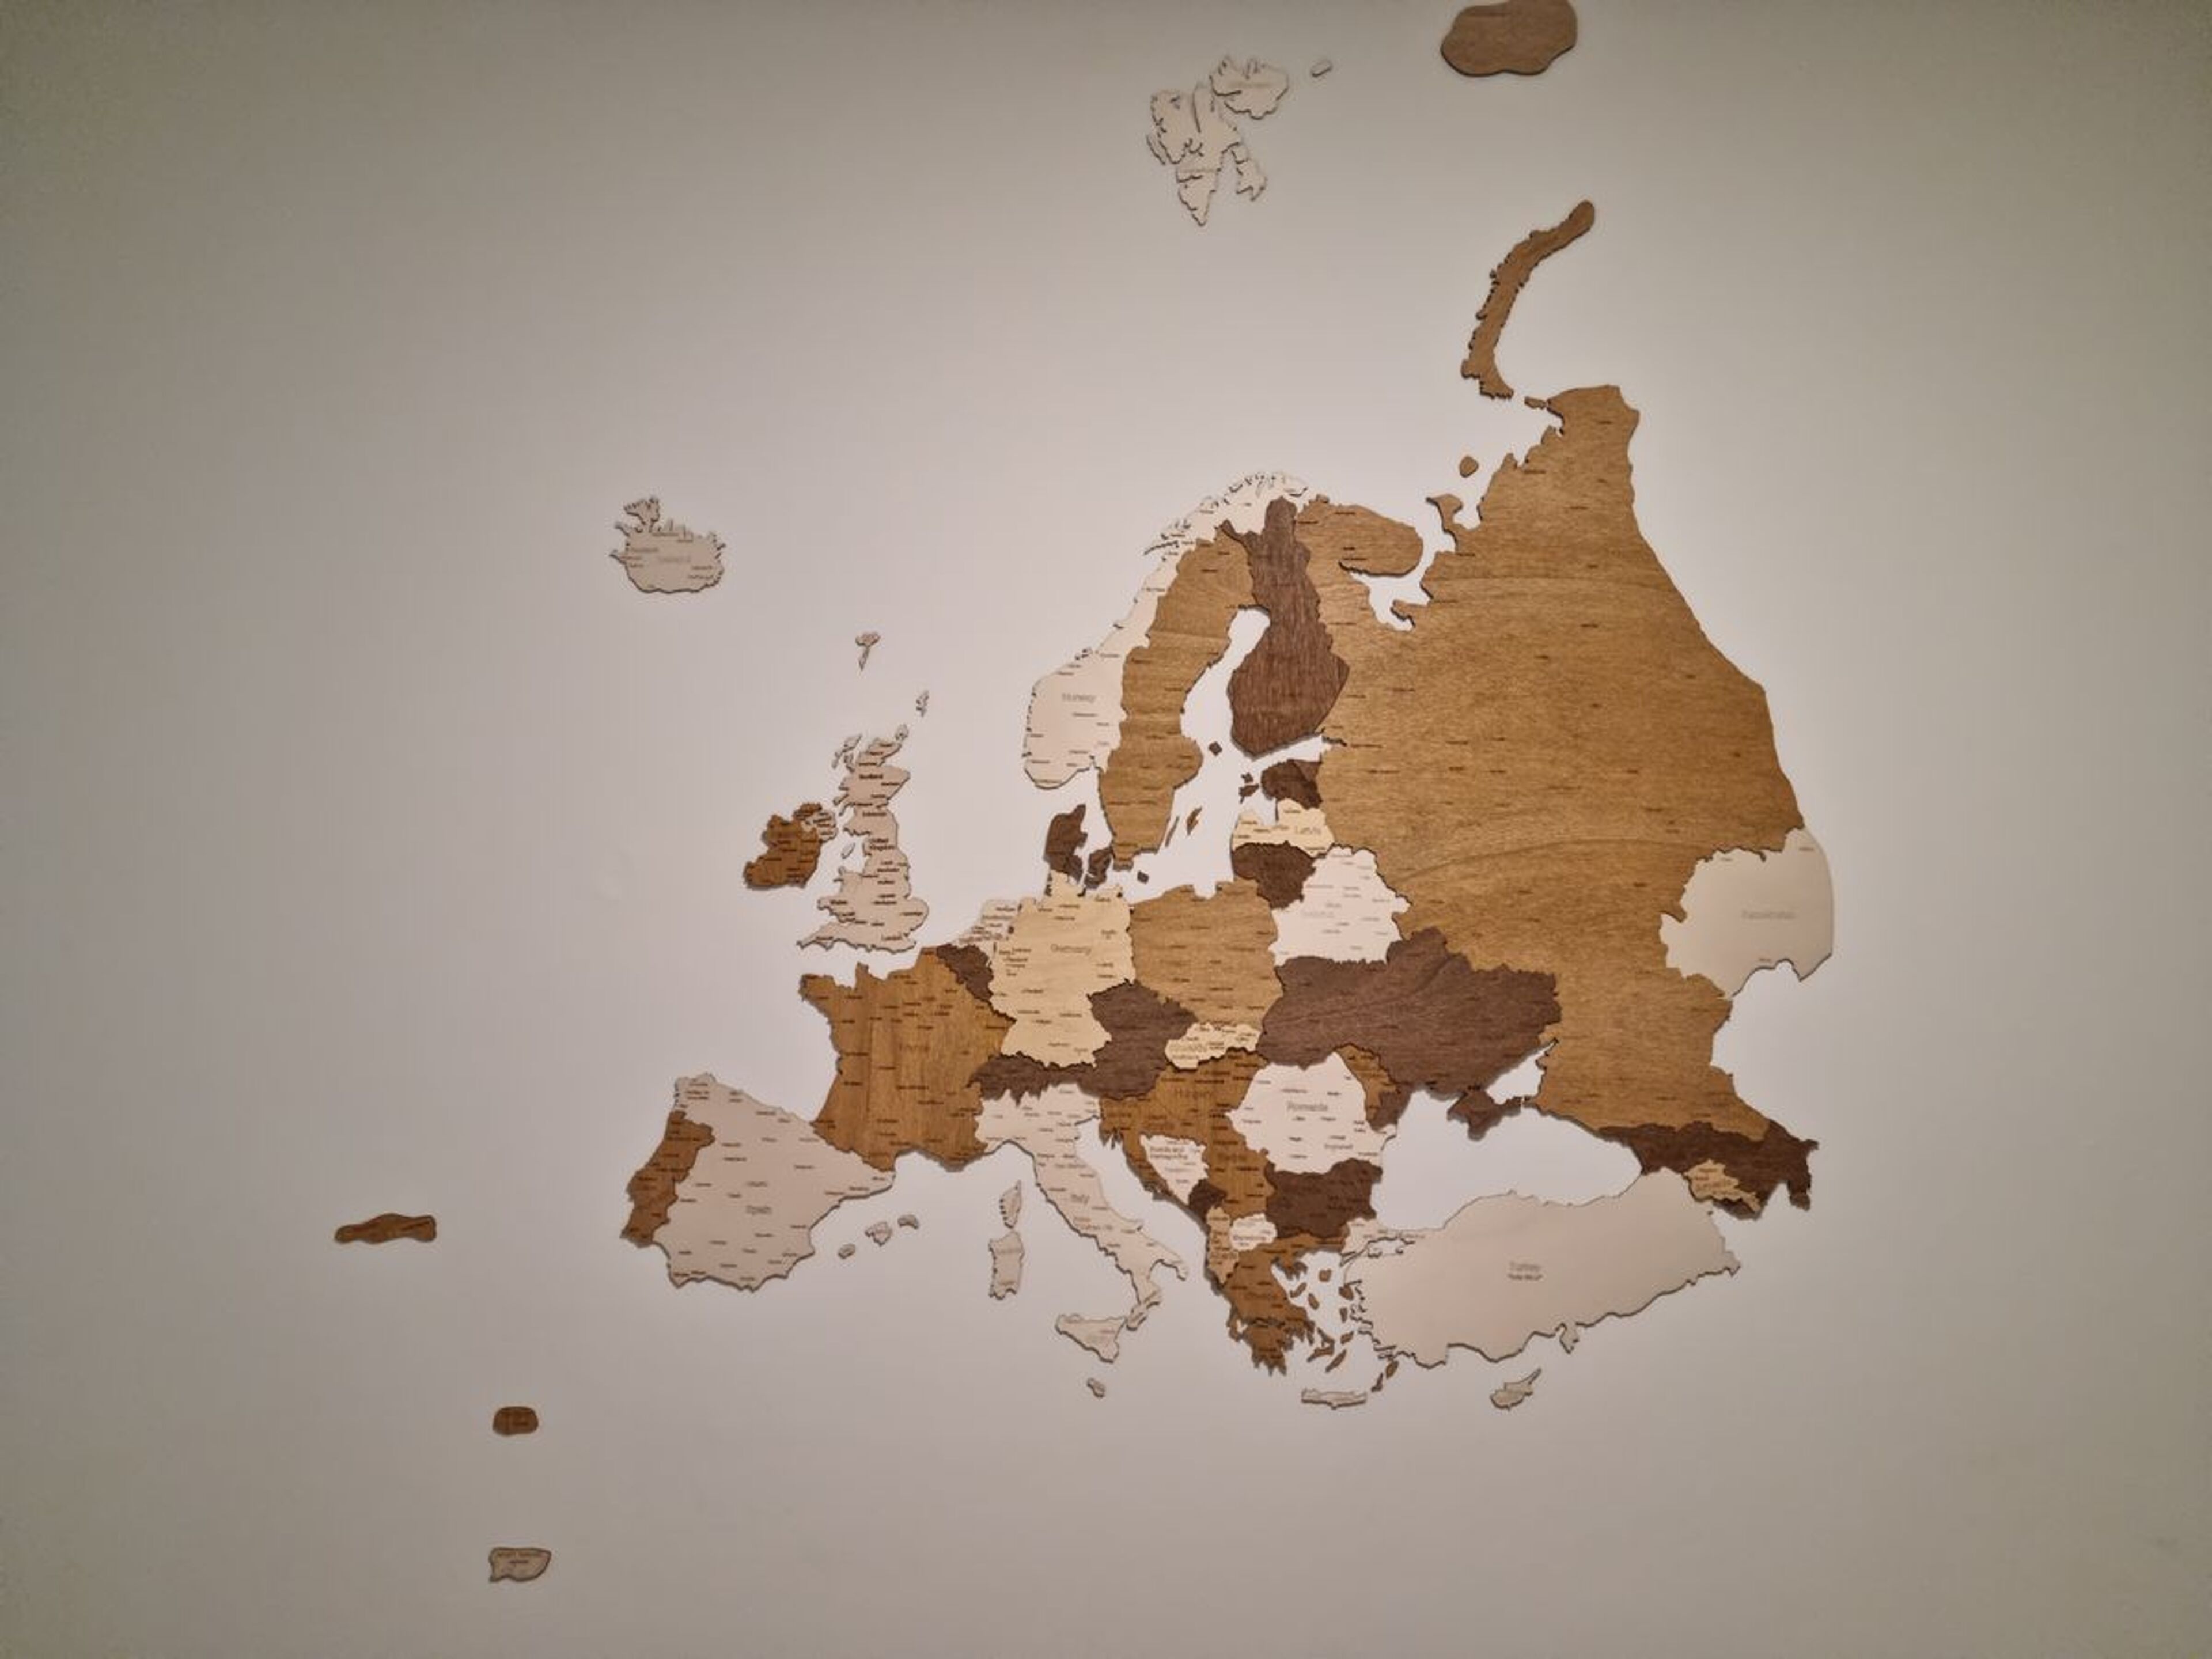 Review for 3D Wooden Wall Map of Europe - image from Jakub